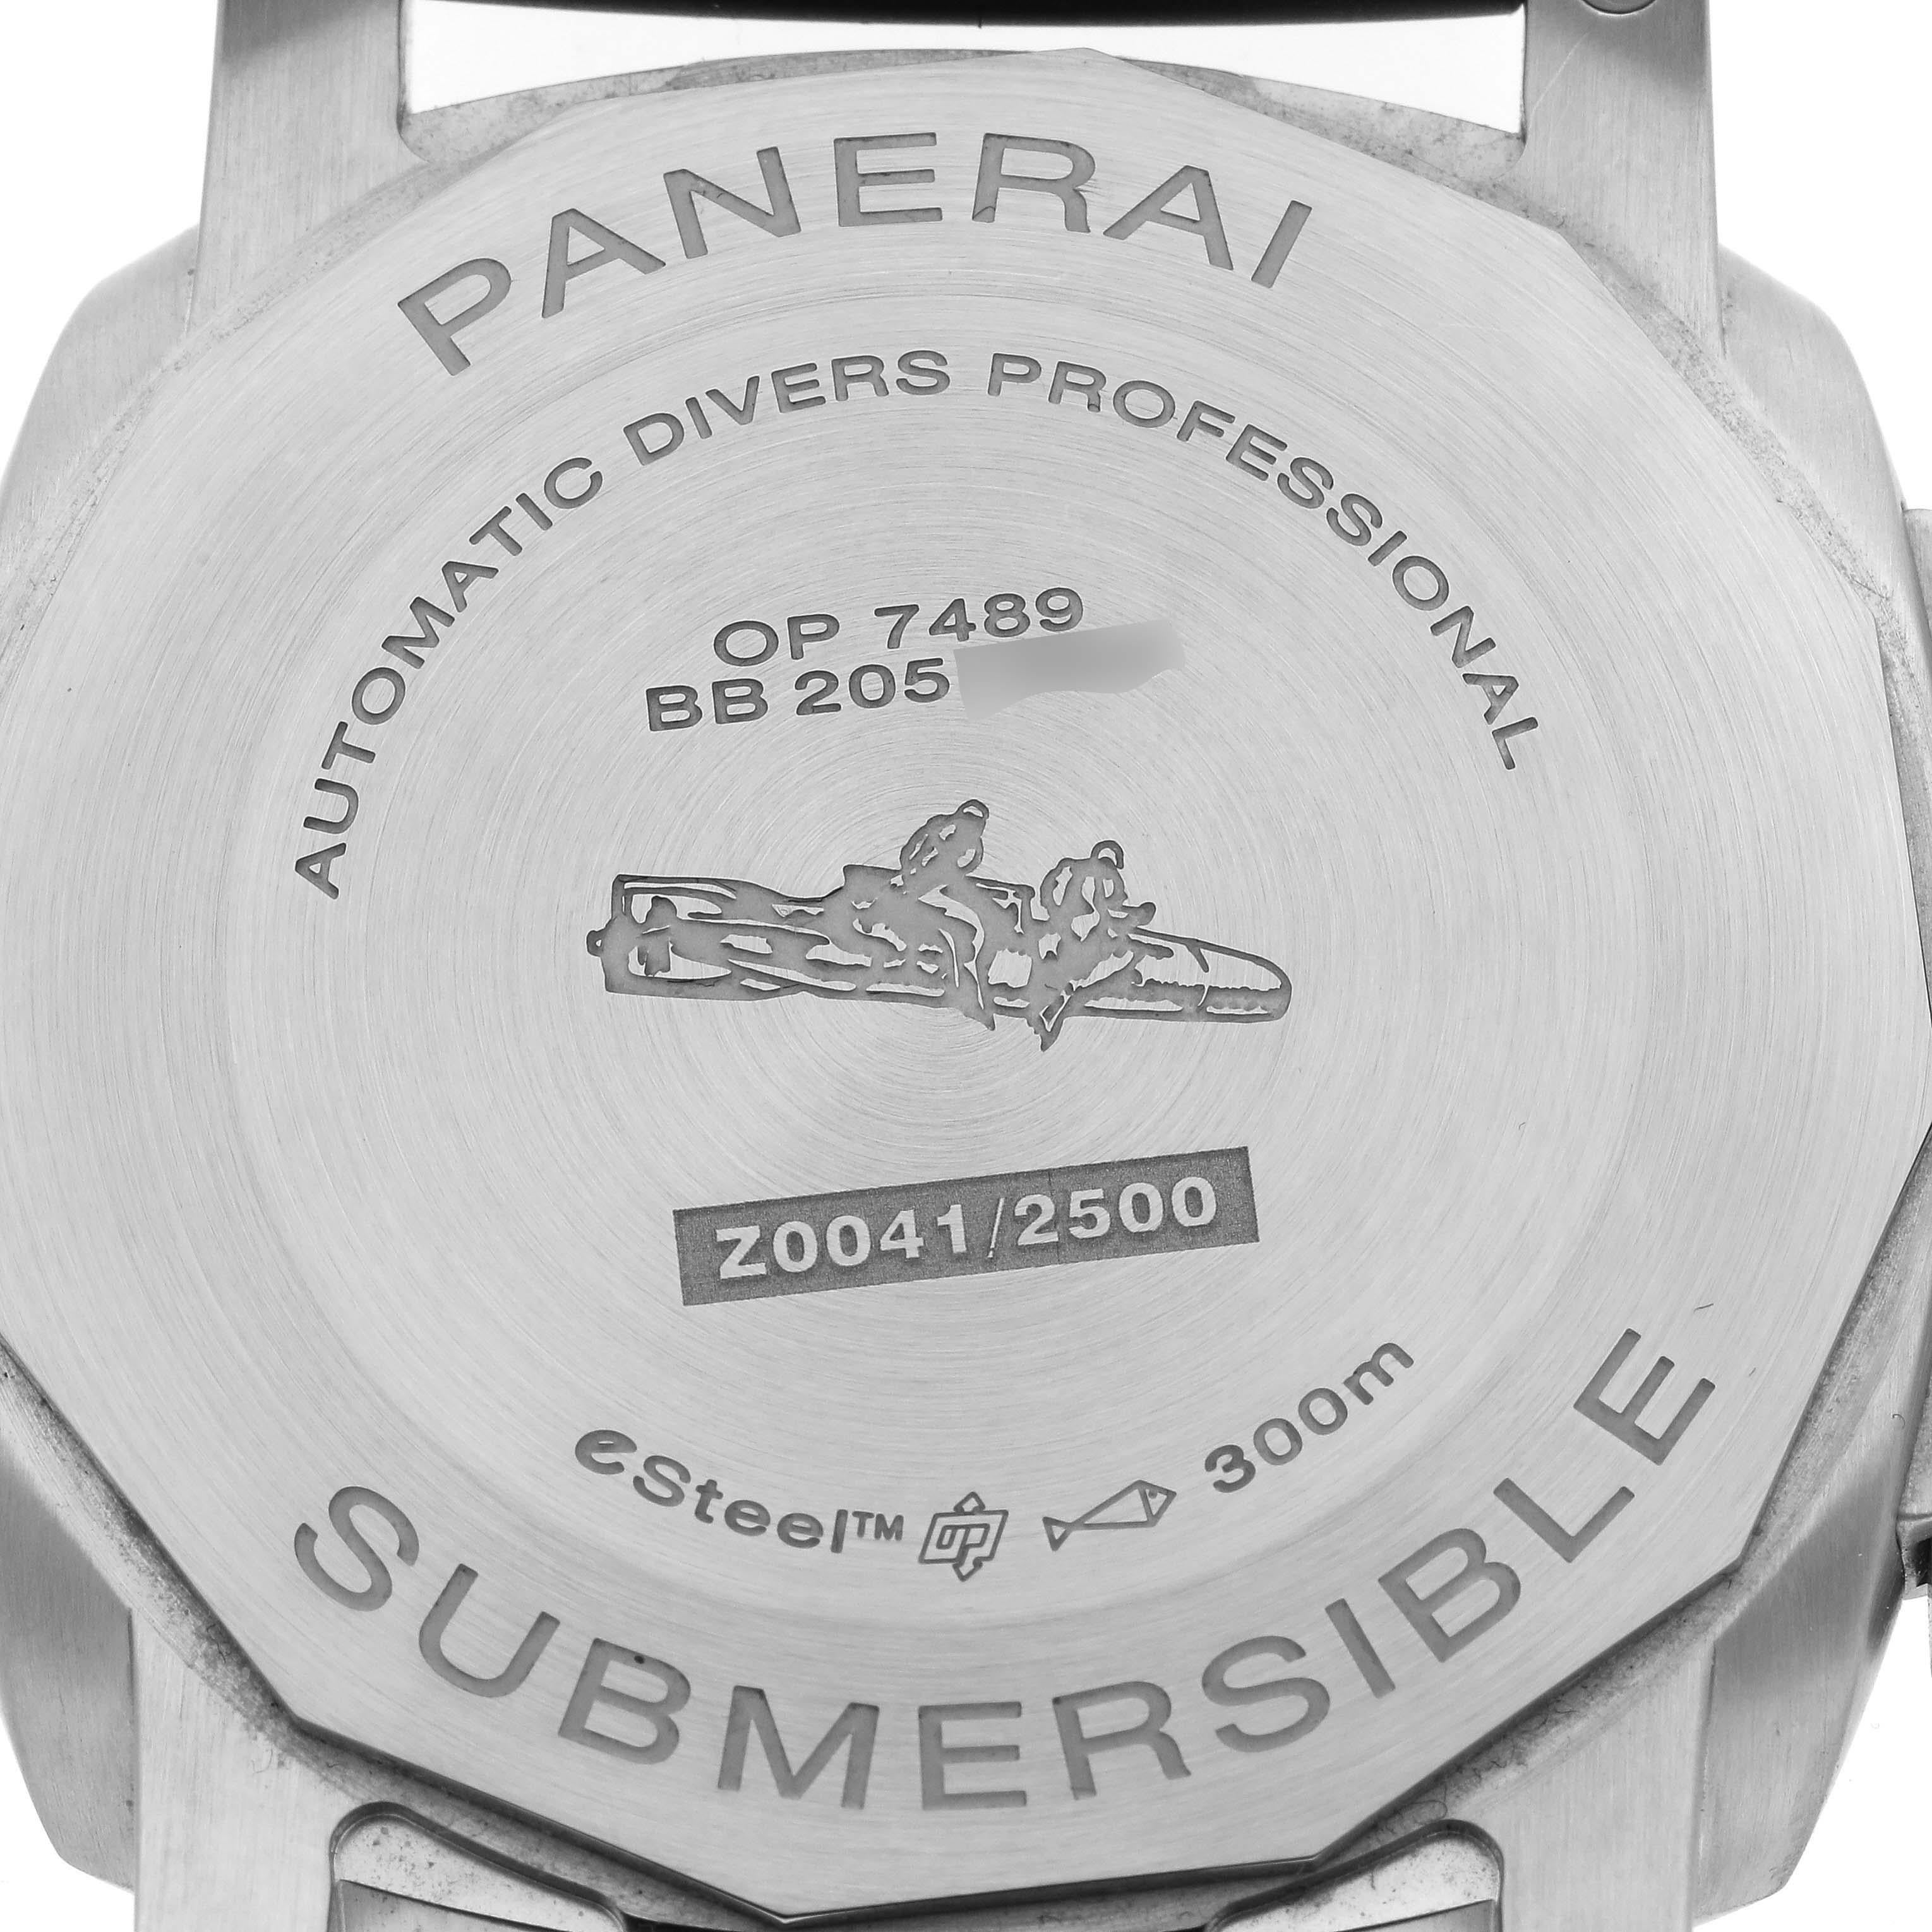 Panerai Submersible QuarantaQuattro Grigio Steel Mens Watch PAM01288 Unworn. Automatic self-winding movement. Stainless steel cushion case, 44.0 mm in diameter. Panerai patented crown protector. Unidirectional rotating diver's bezel. Scratch